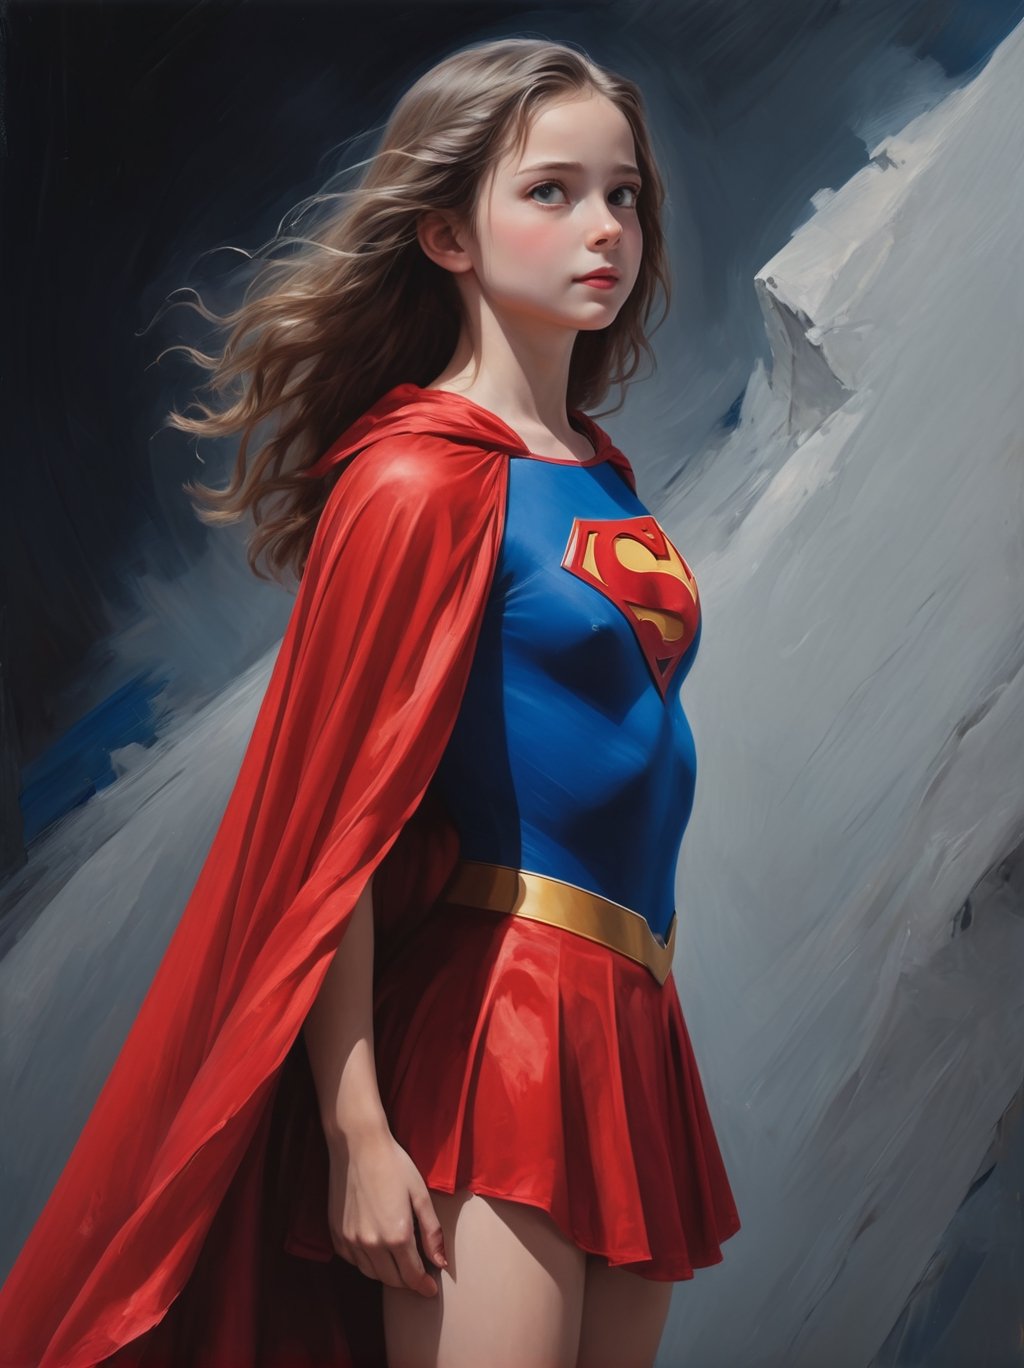 preteen girl in superman outfit, red mini-skirt, red cape, blue leotard,Seductive presence, low_key backdrop, carefree hair falling over her shoulders, framing her face with a morbid air,perfect face, ((half_profile)), realistic proportions, realism oil painting